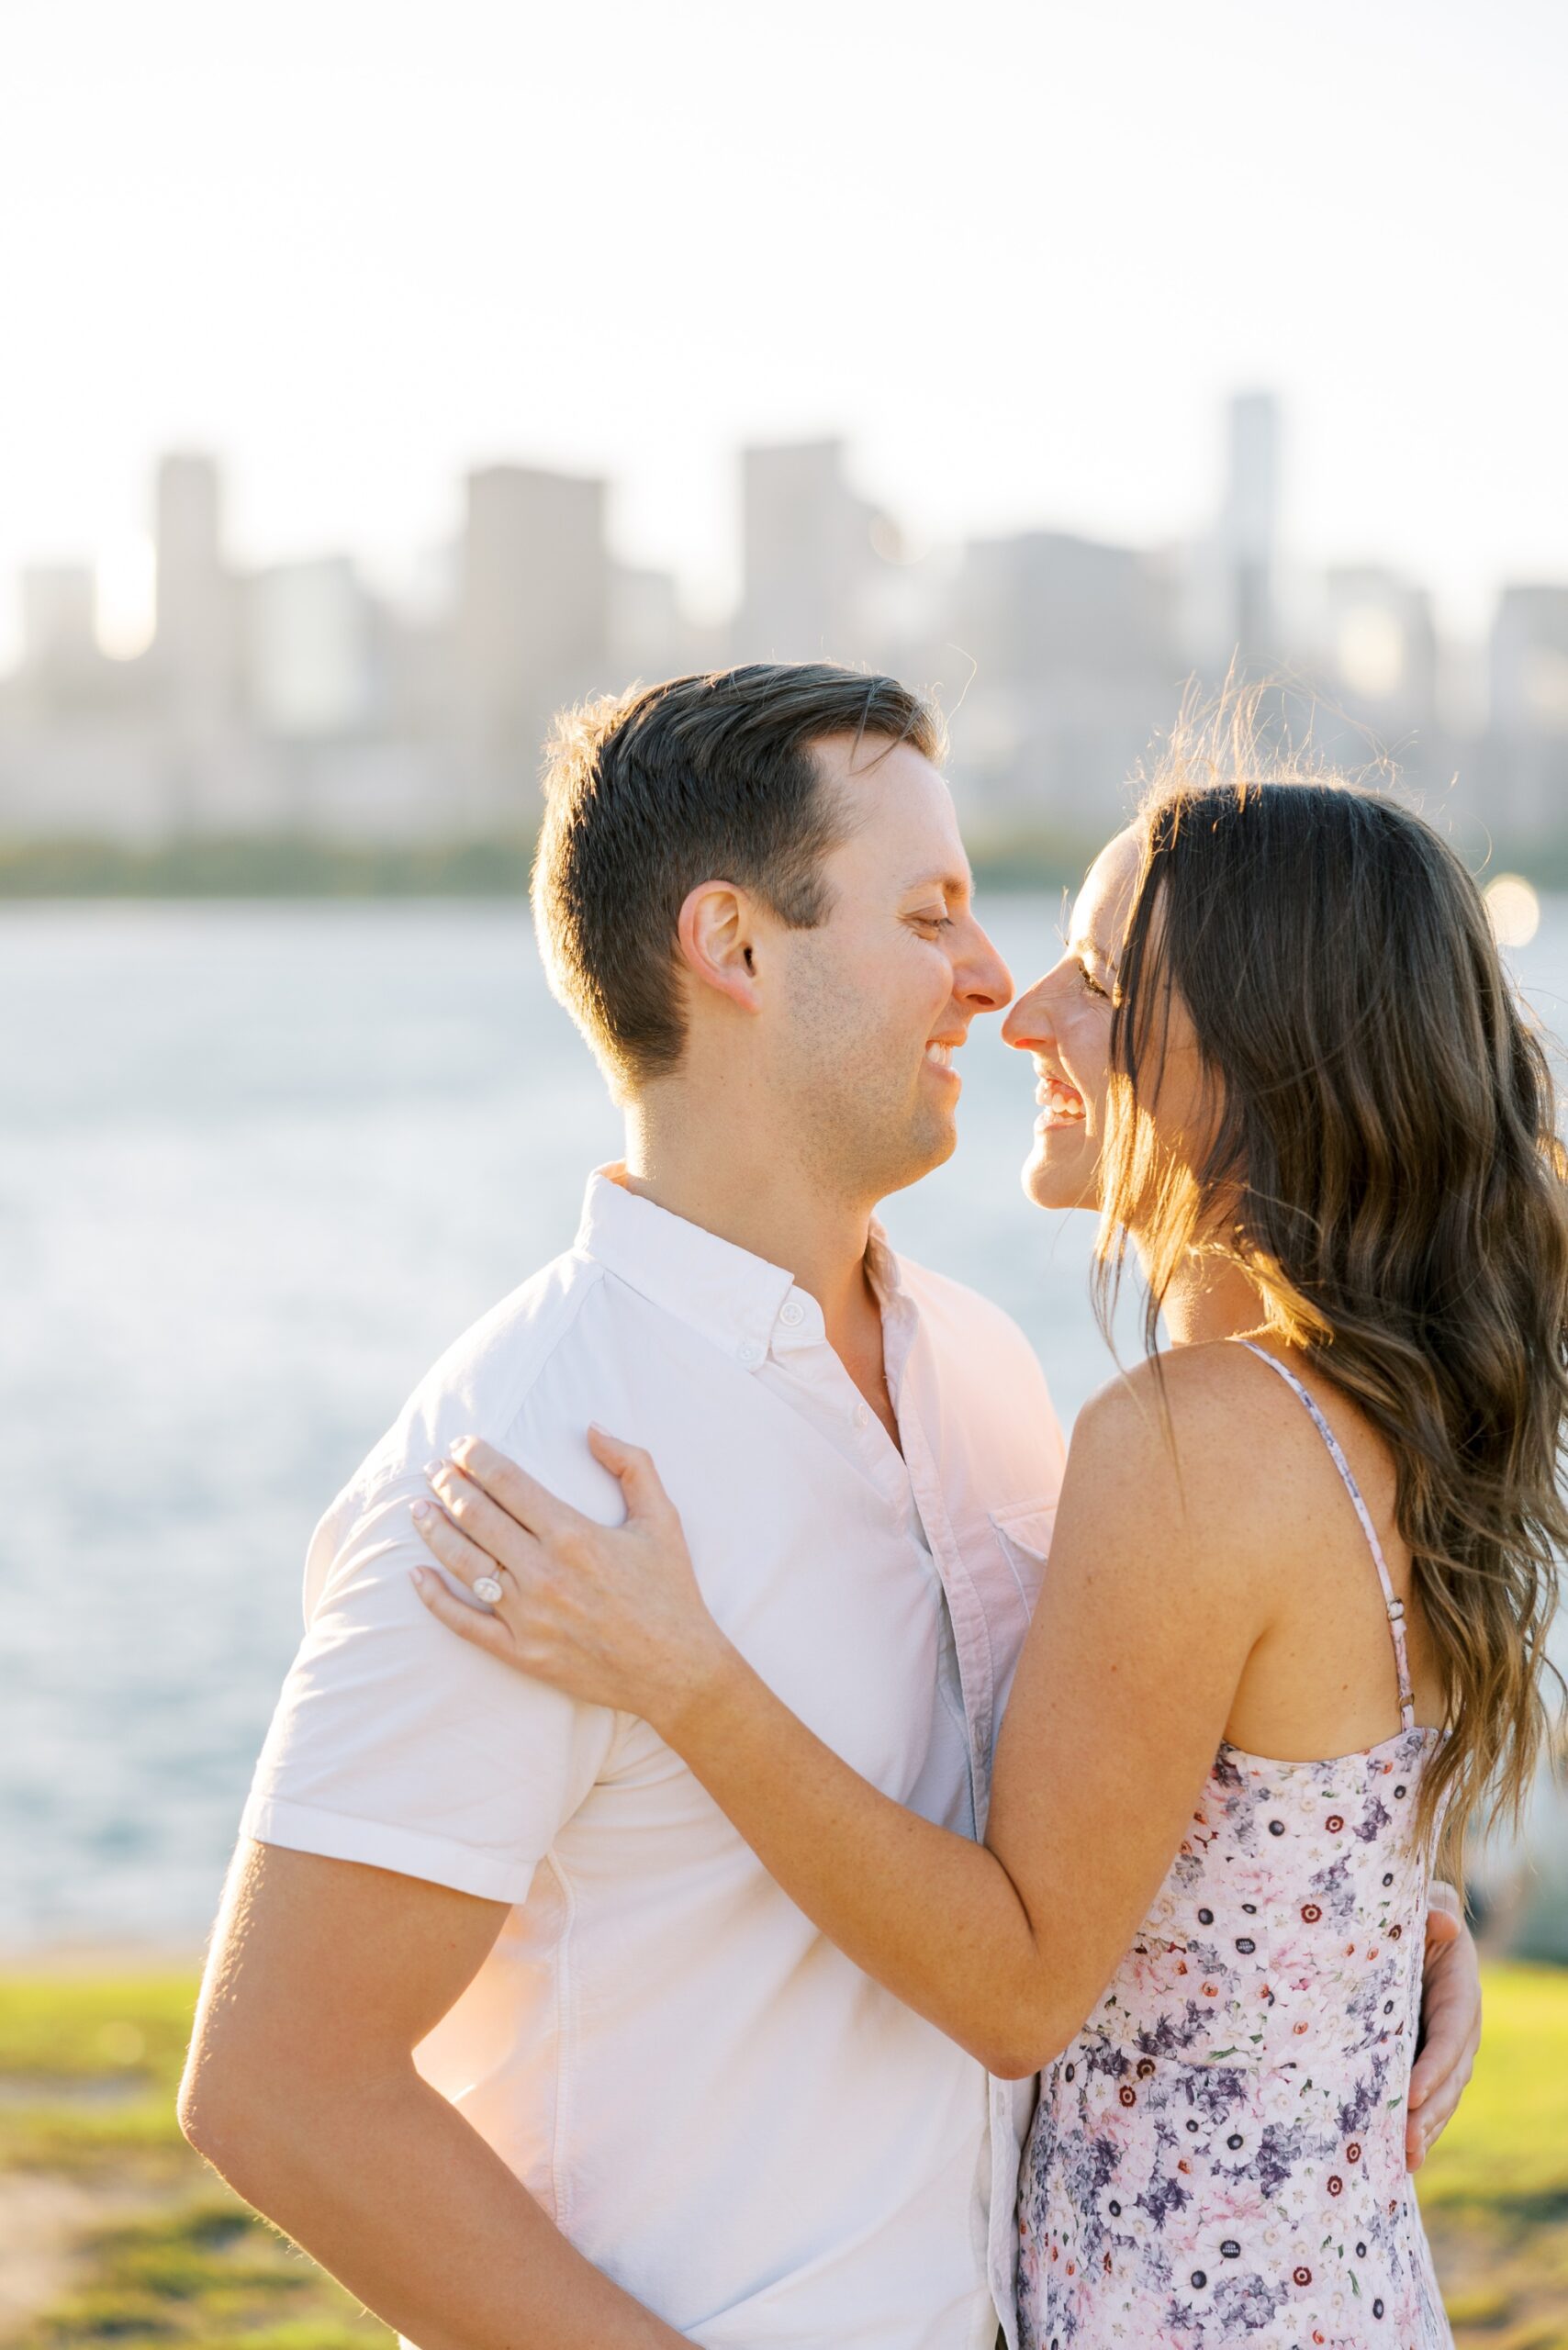 The couple smiled in front of the Chicago skyline during their Museum Campus engagement photos